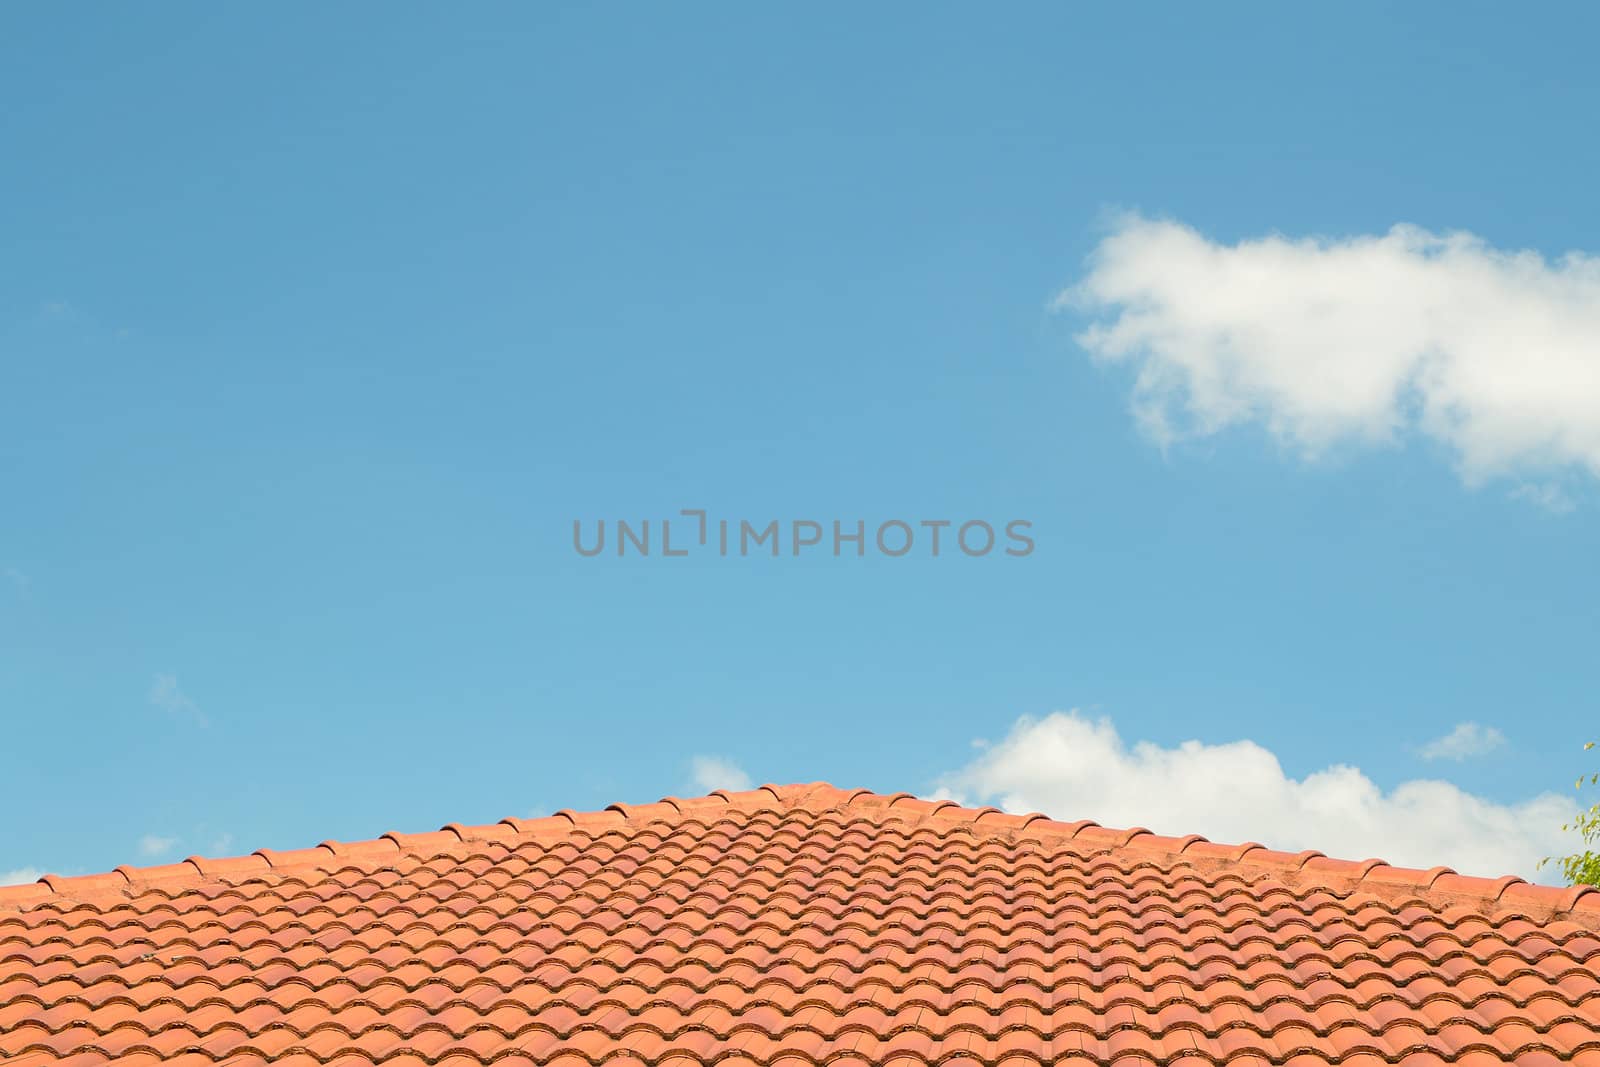 photo of a concrete tiled roof, roofing materials against blue sky.